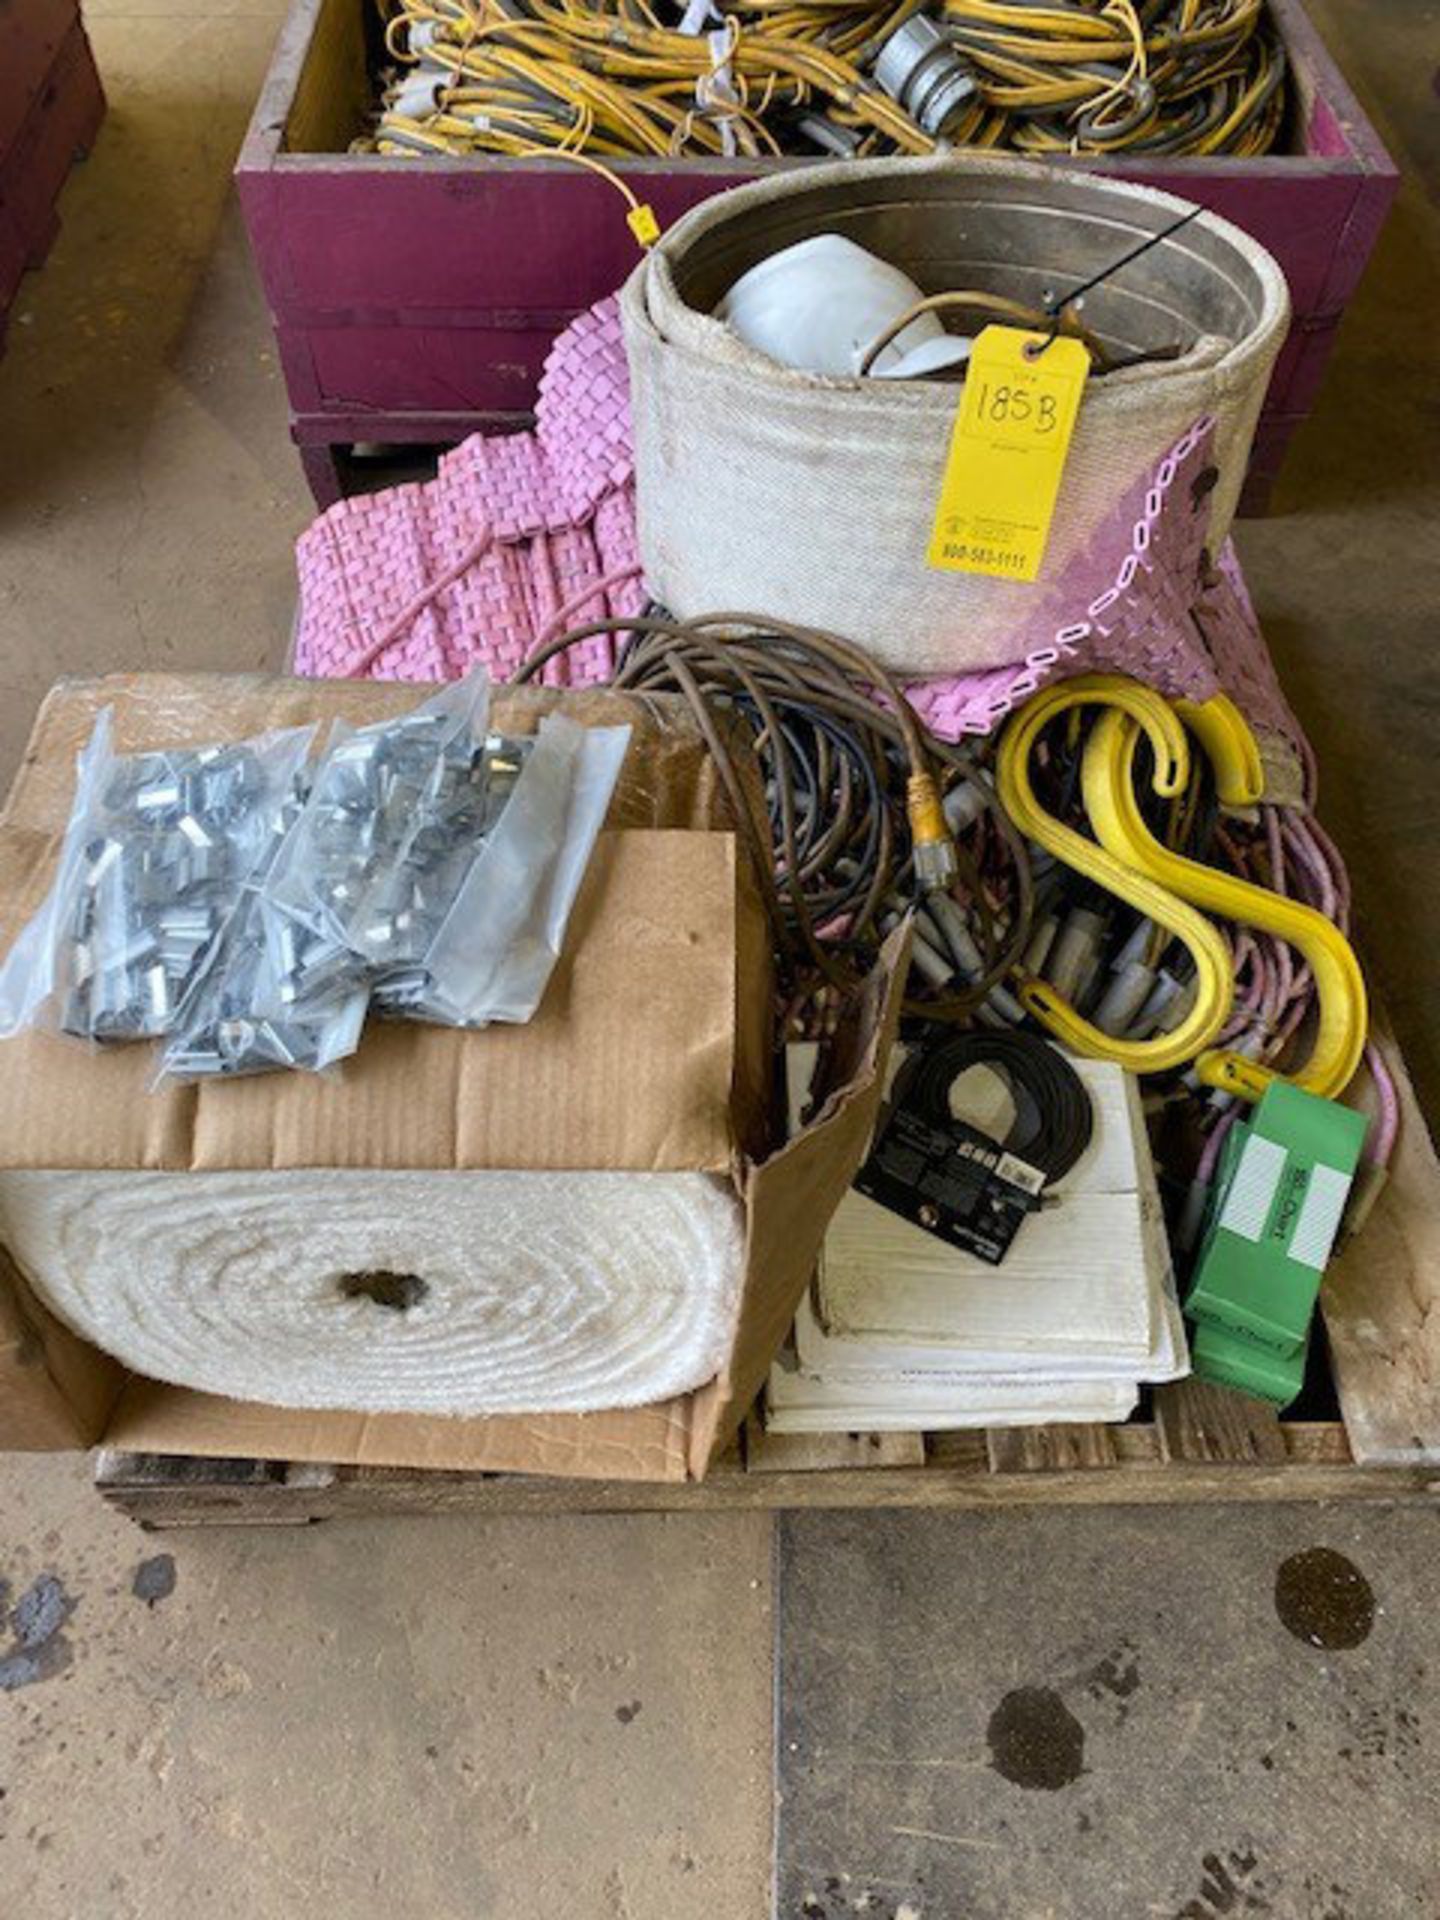 Lot of heat sensor cables, ceramic blankets and/or other accessories (TR 12). Contents to be